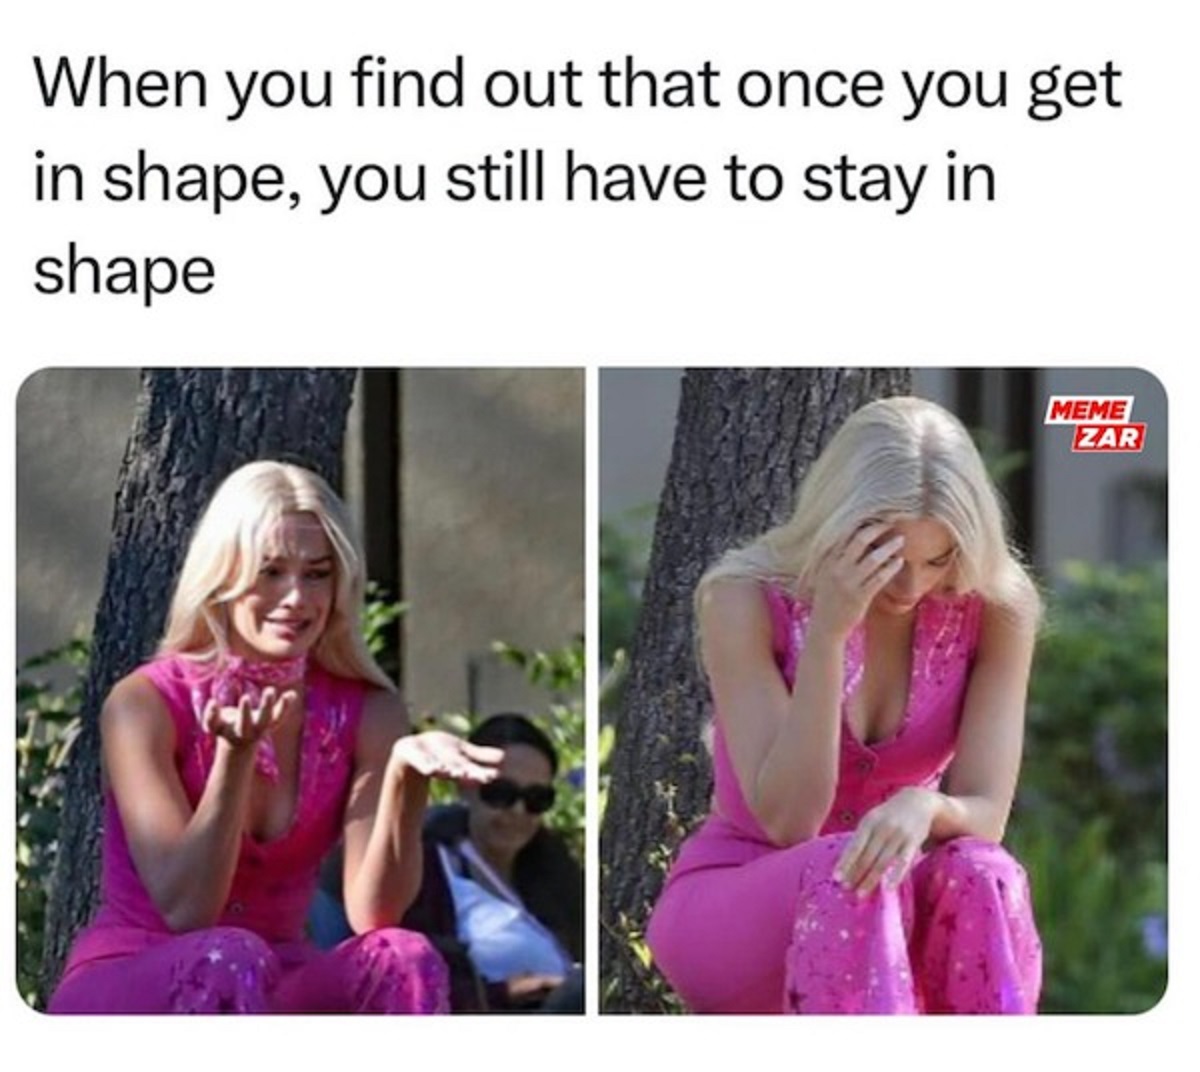 i m trying to save money but i m just a girl - When you find out that once you get in shape, you still have to stay in shape Meme Zar